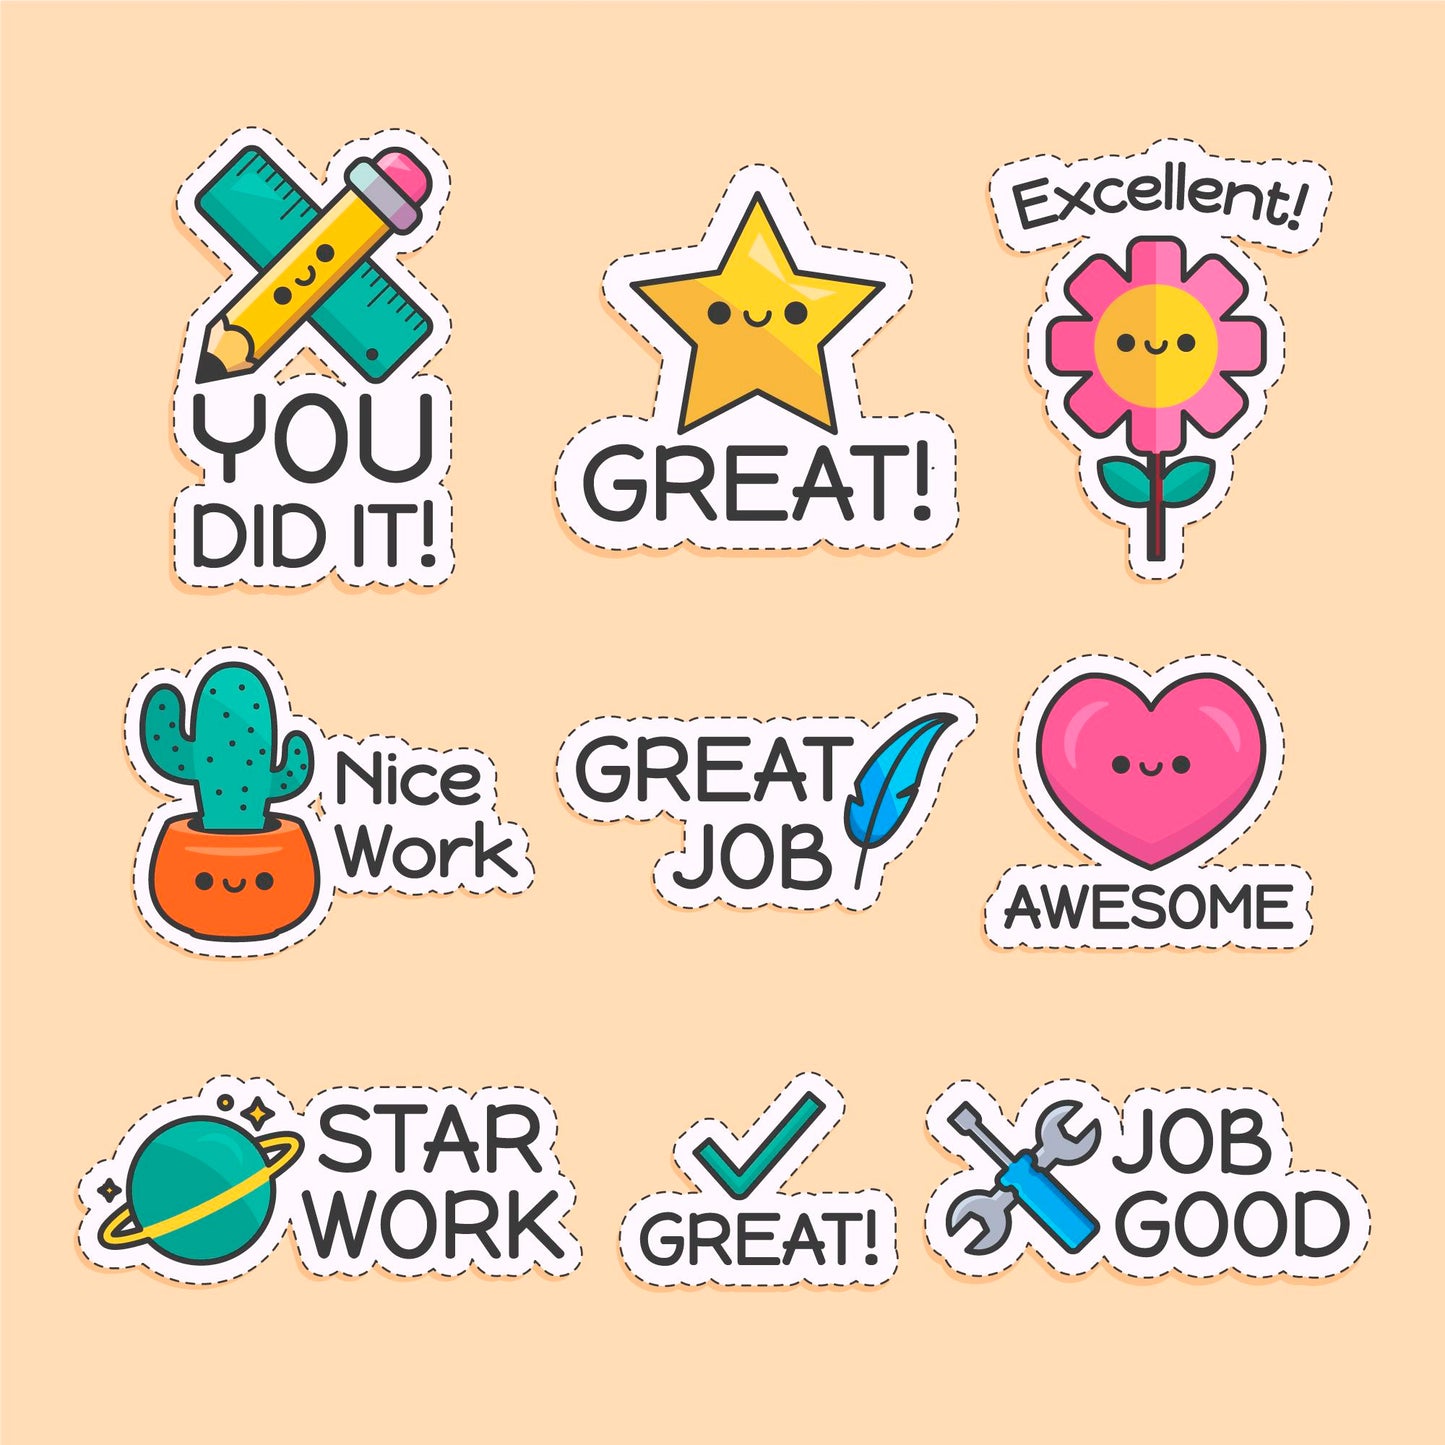 10 Sheets of Cute Printable Educational Stickers (Bundle Deal!!)